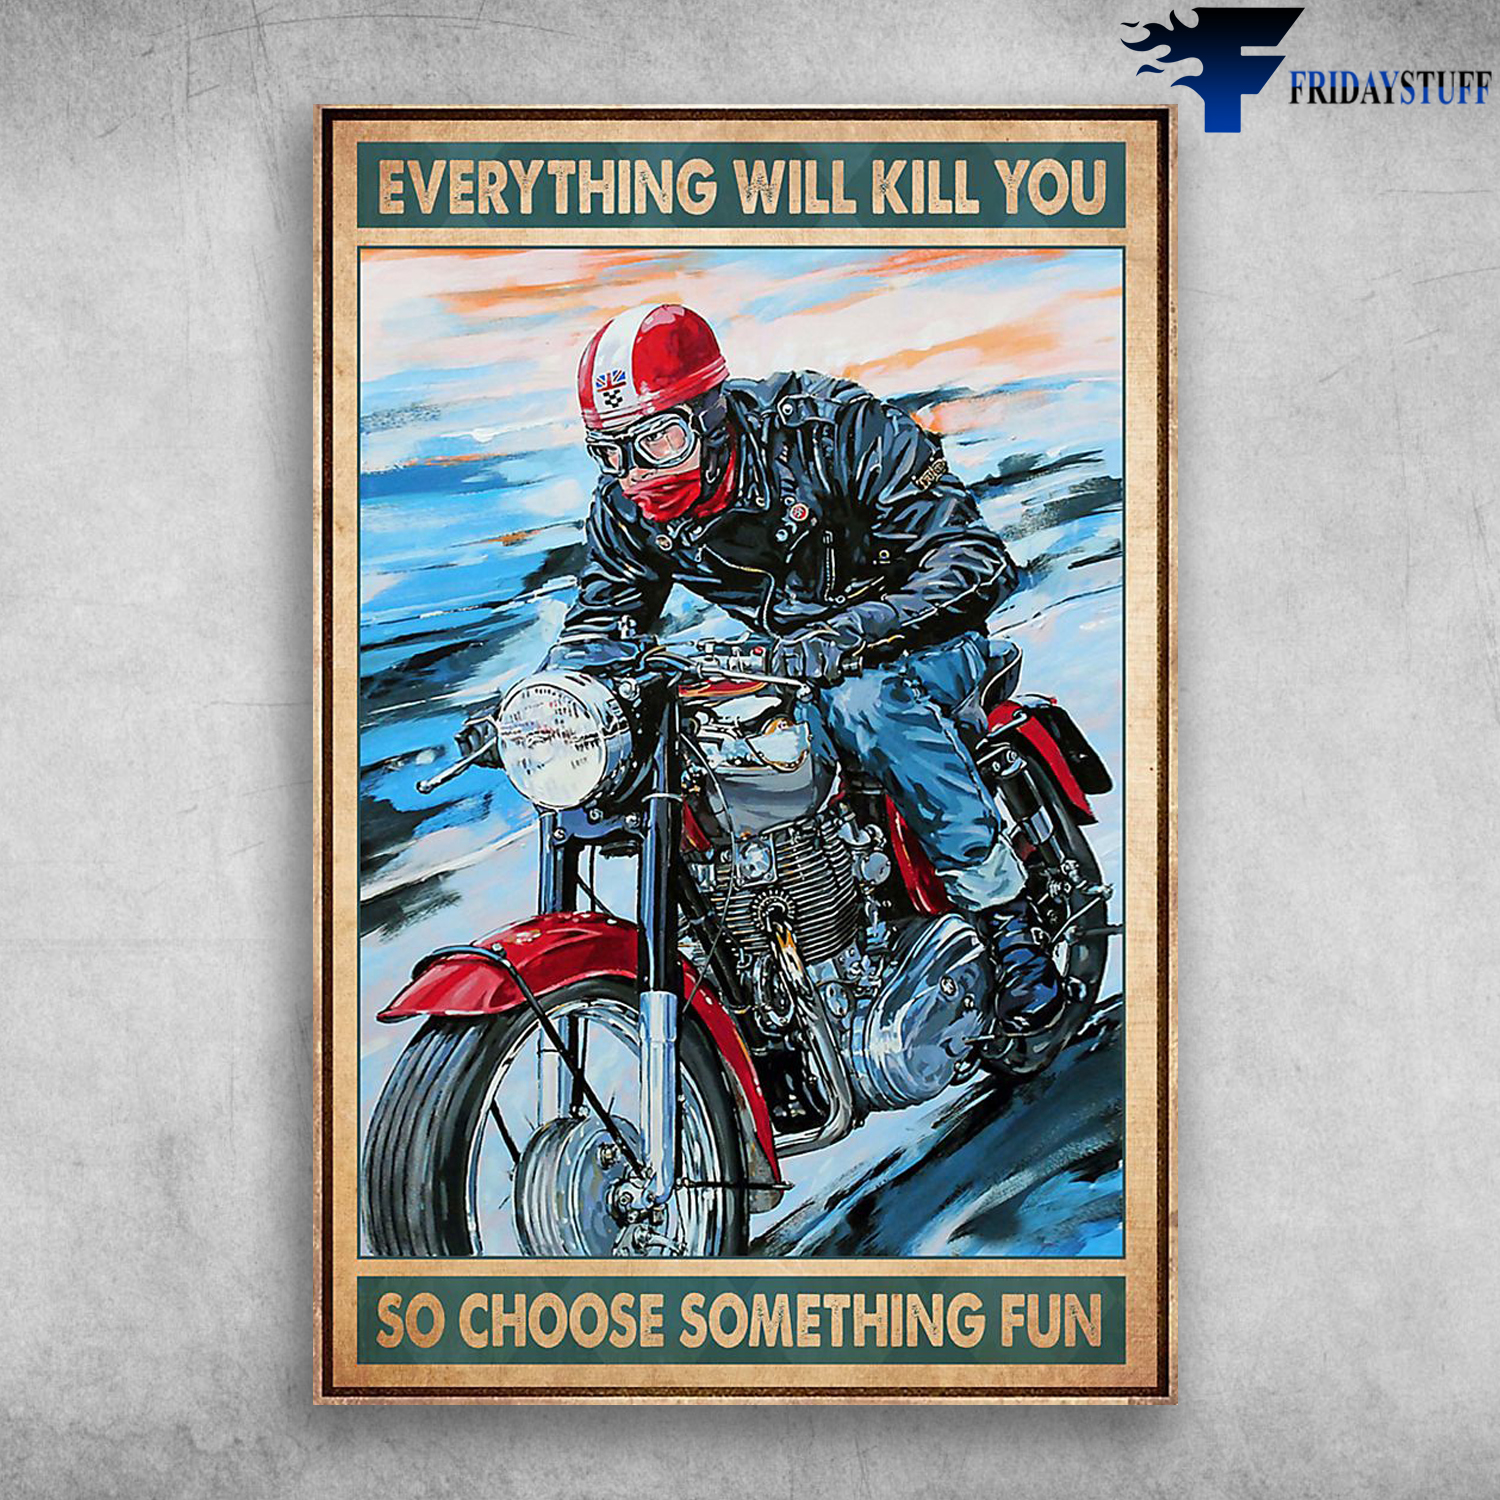 Biker And Royal Enfield Everything Will Kill You So Choose Something Fun